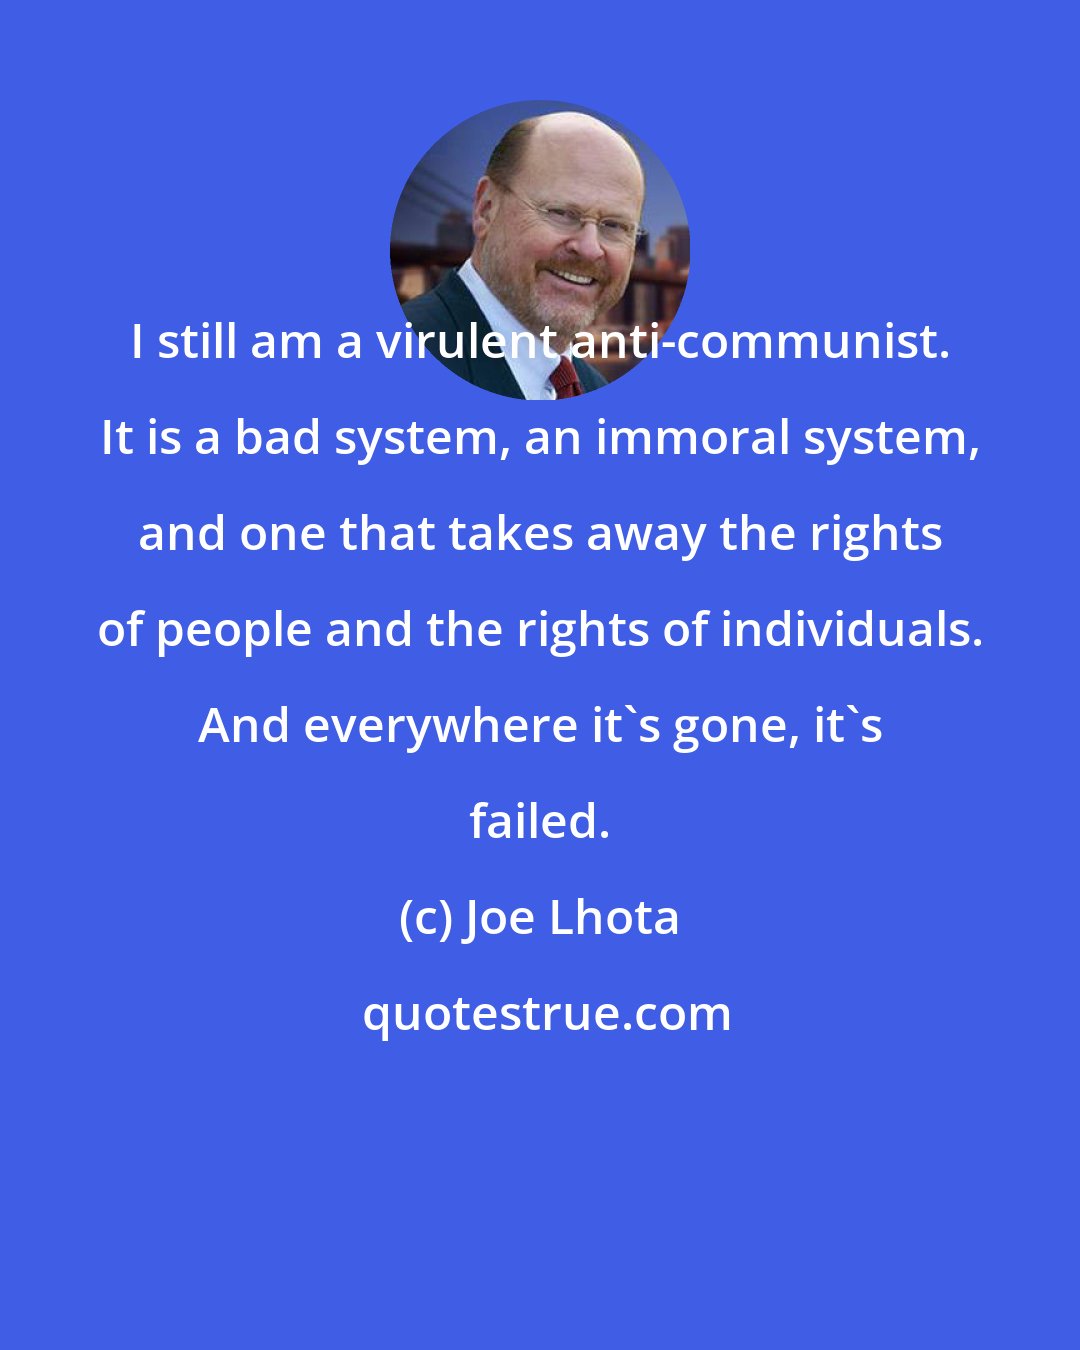 Joe Lhota: I still am a virulent anti-communist. It is a bad system, an immoral system, and one that takes away the rights of people and the rights of individuals. And everywhere it's gone, it's failed.